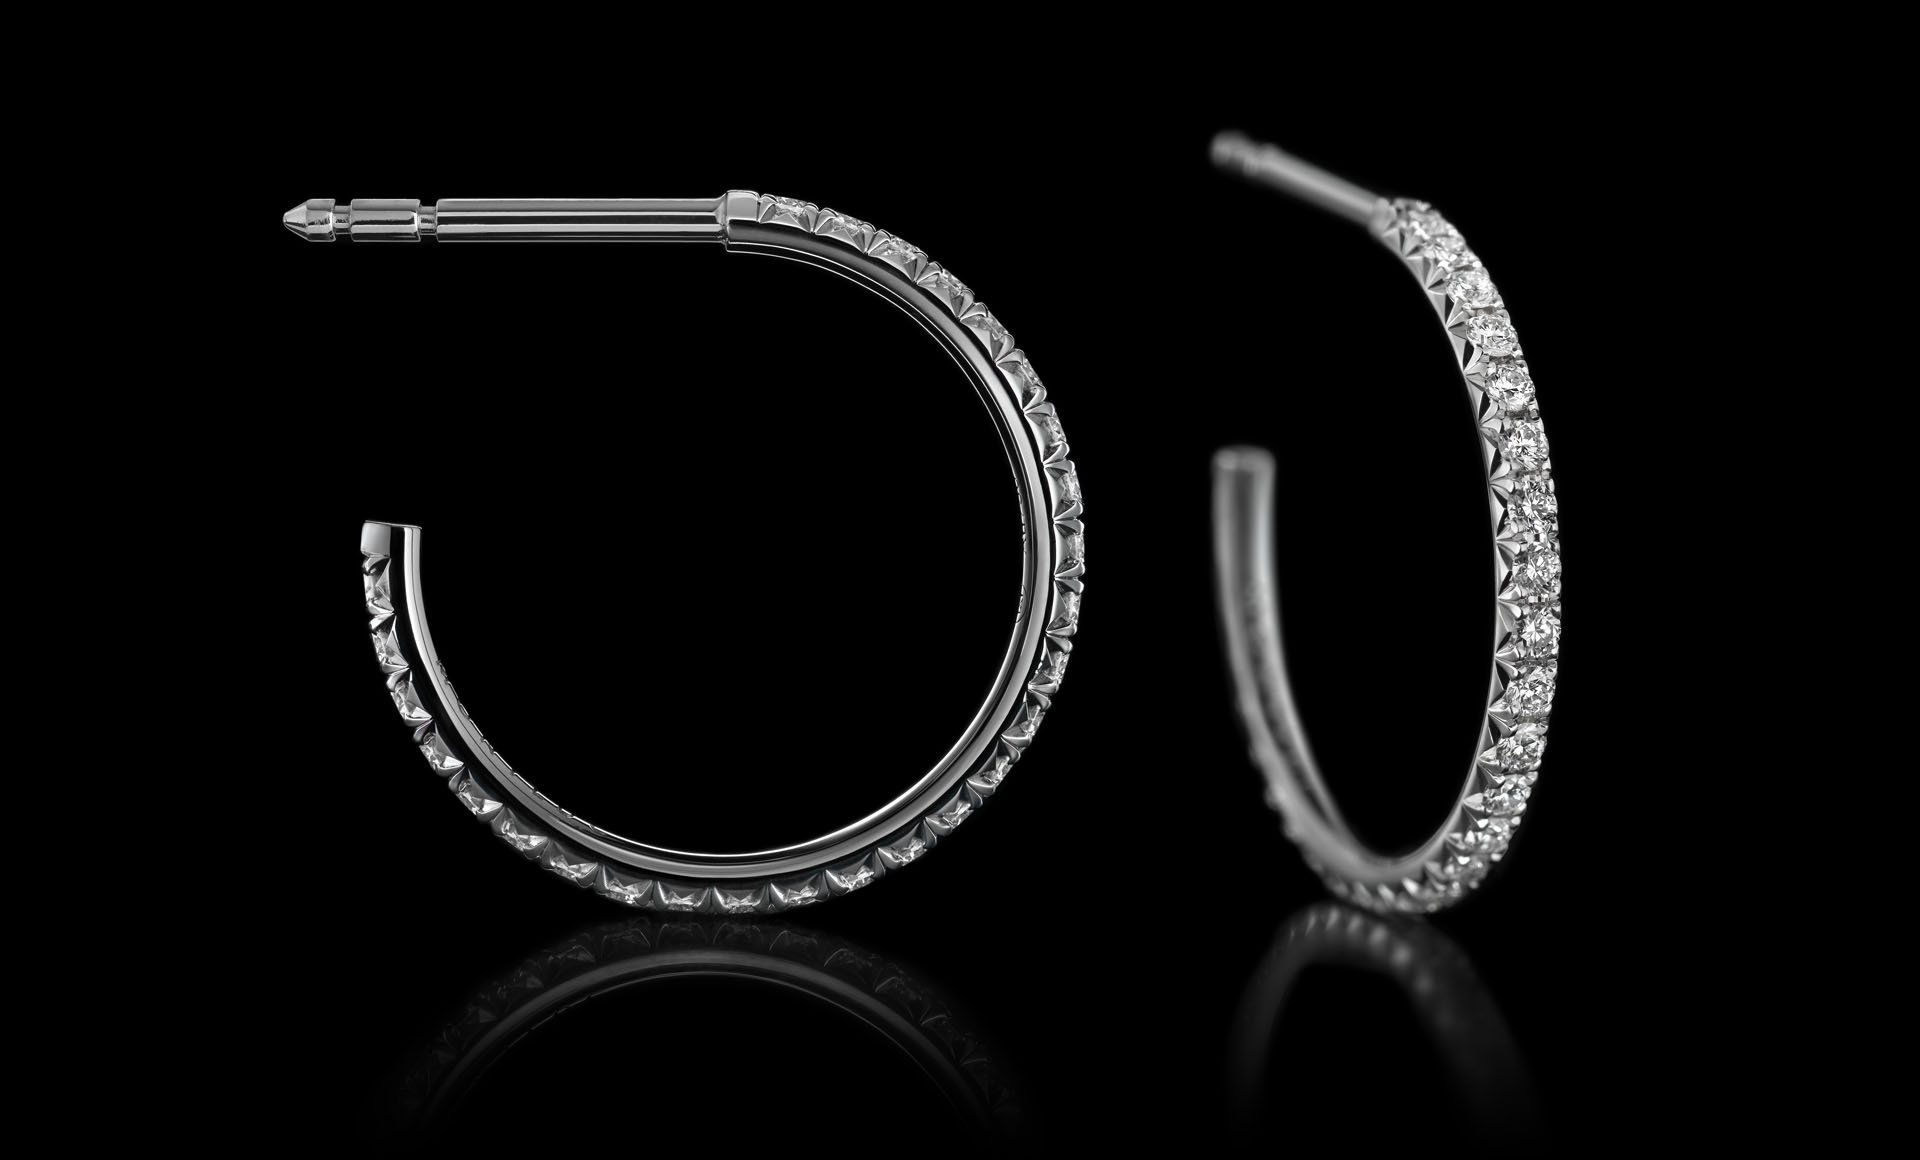 Montluc - Halo No 2. Diamond hoop earrings, seen from the side and front